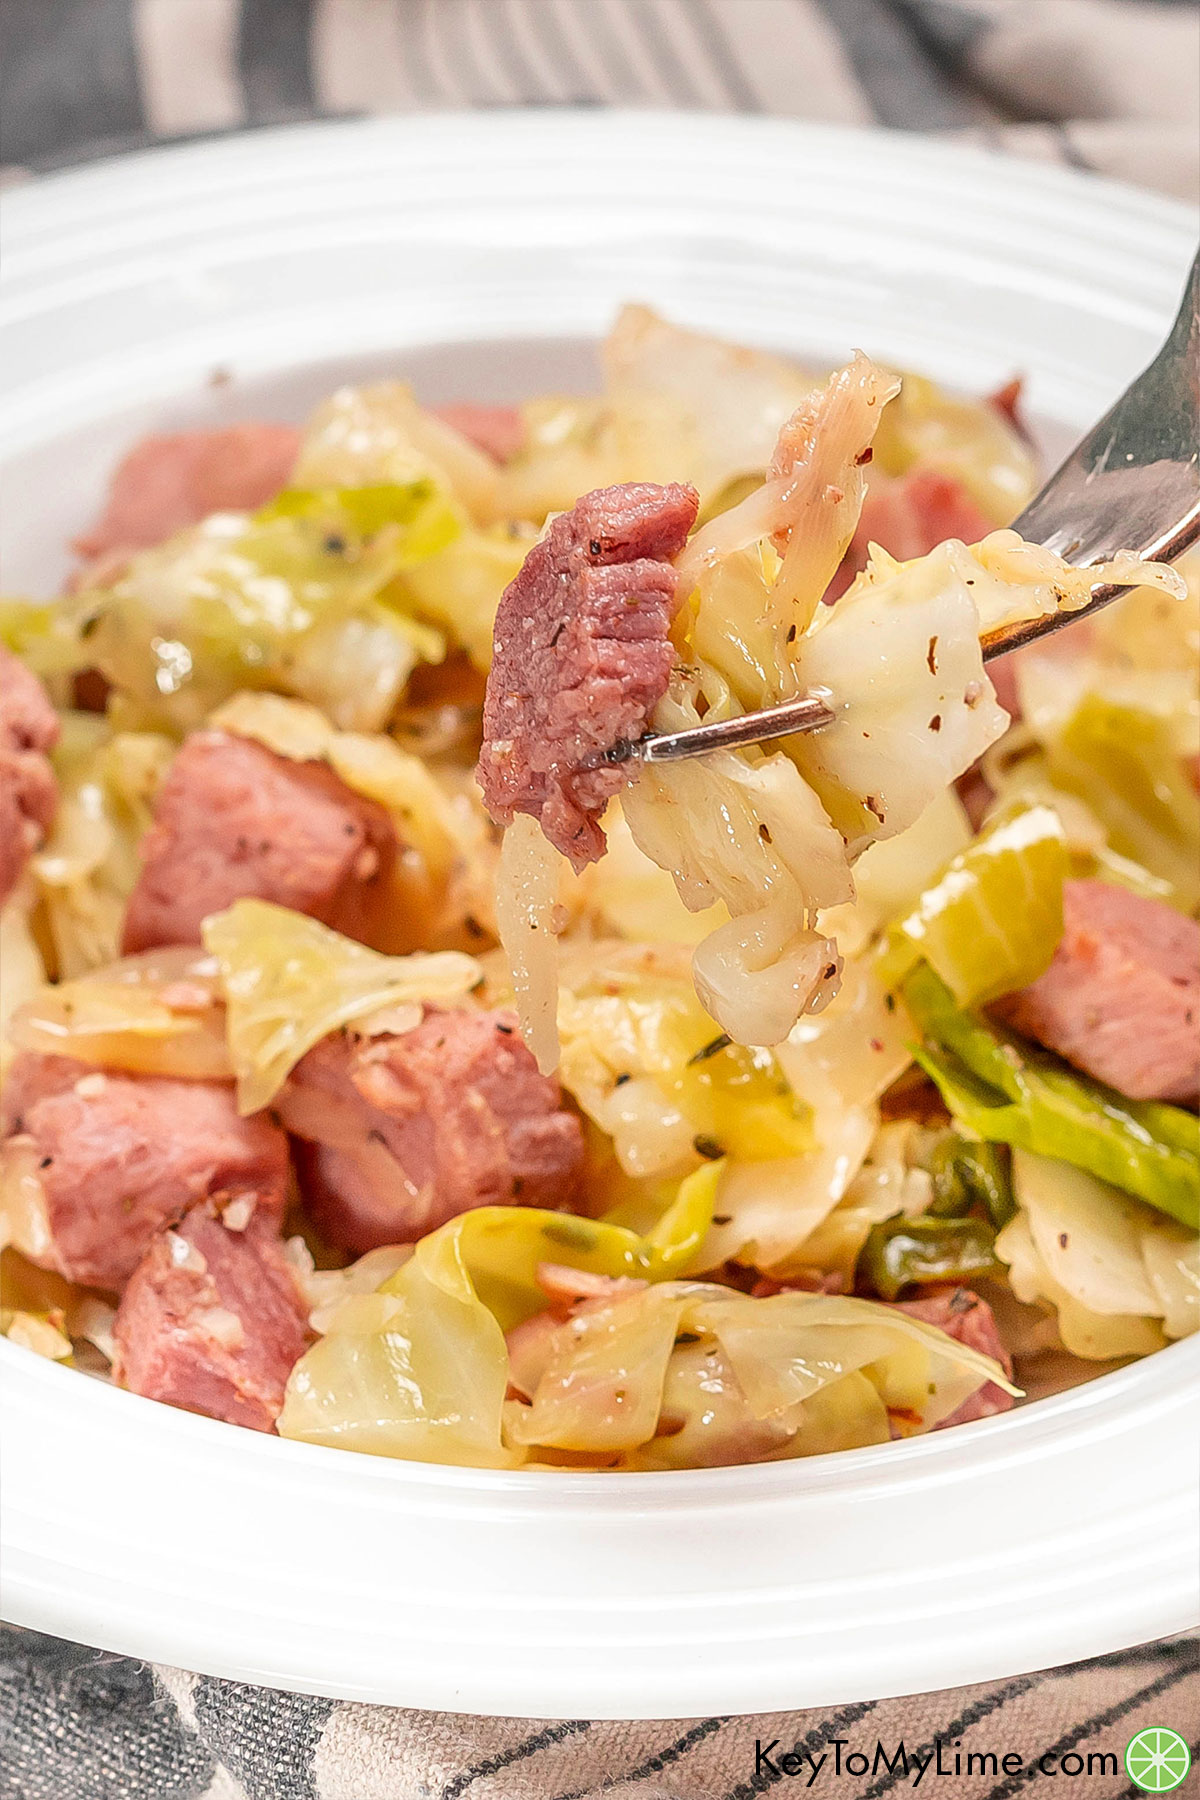 A close up a forkful of ham with cabbage showing the glistening texture.